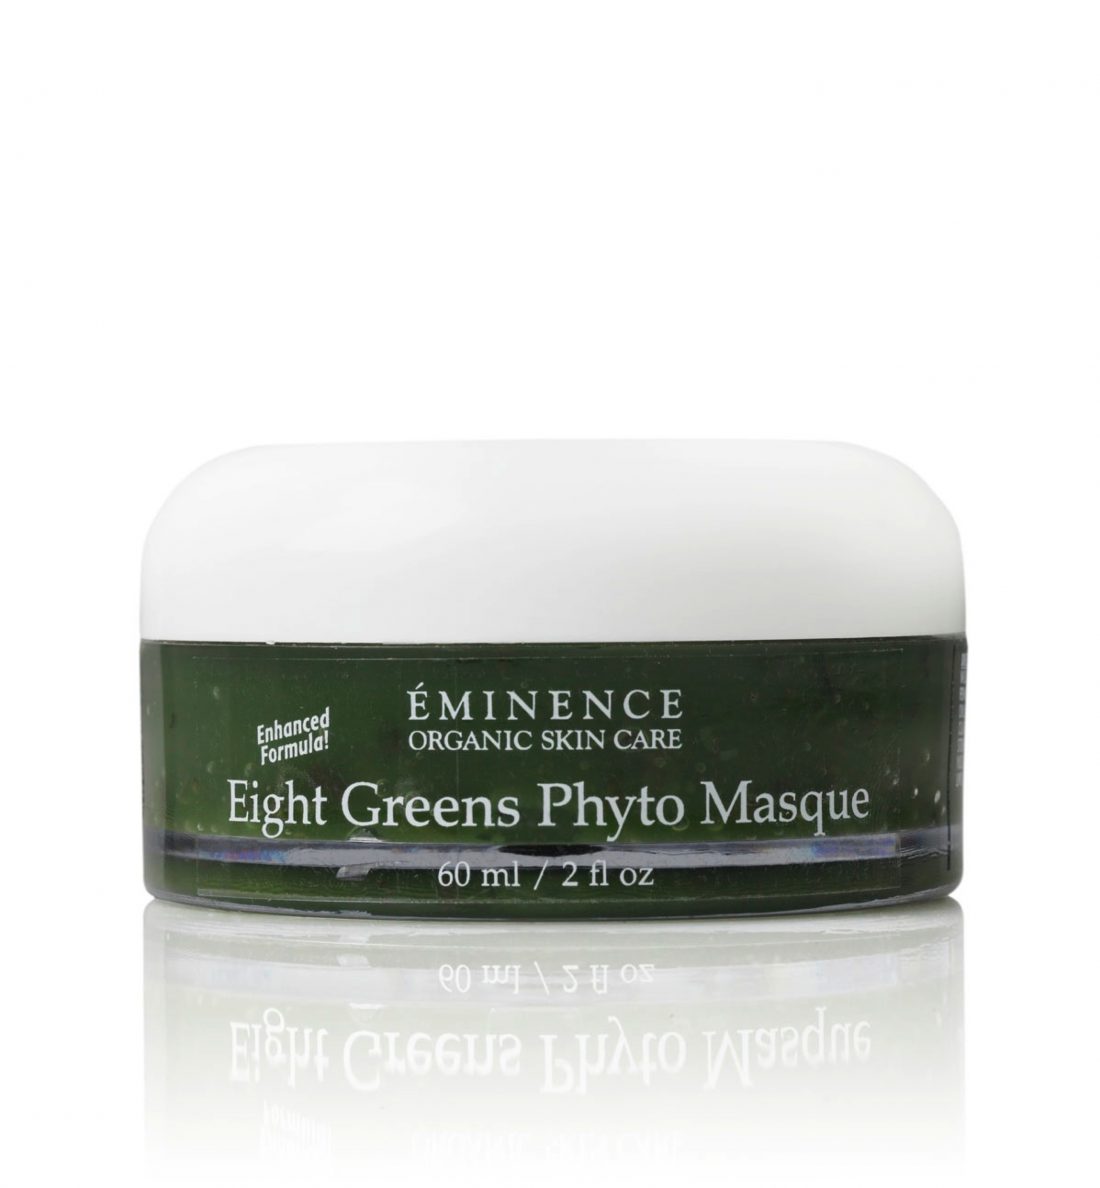 eminence_eight_greens_phyto_masque